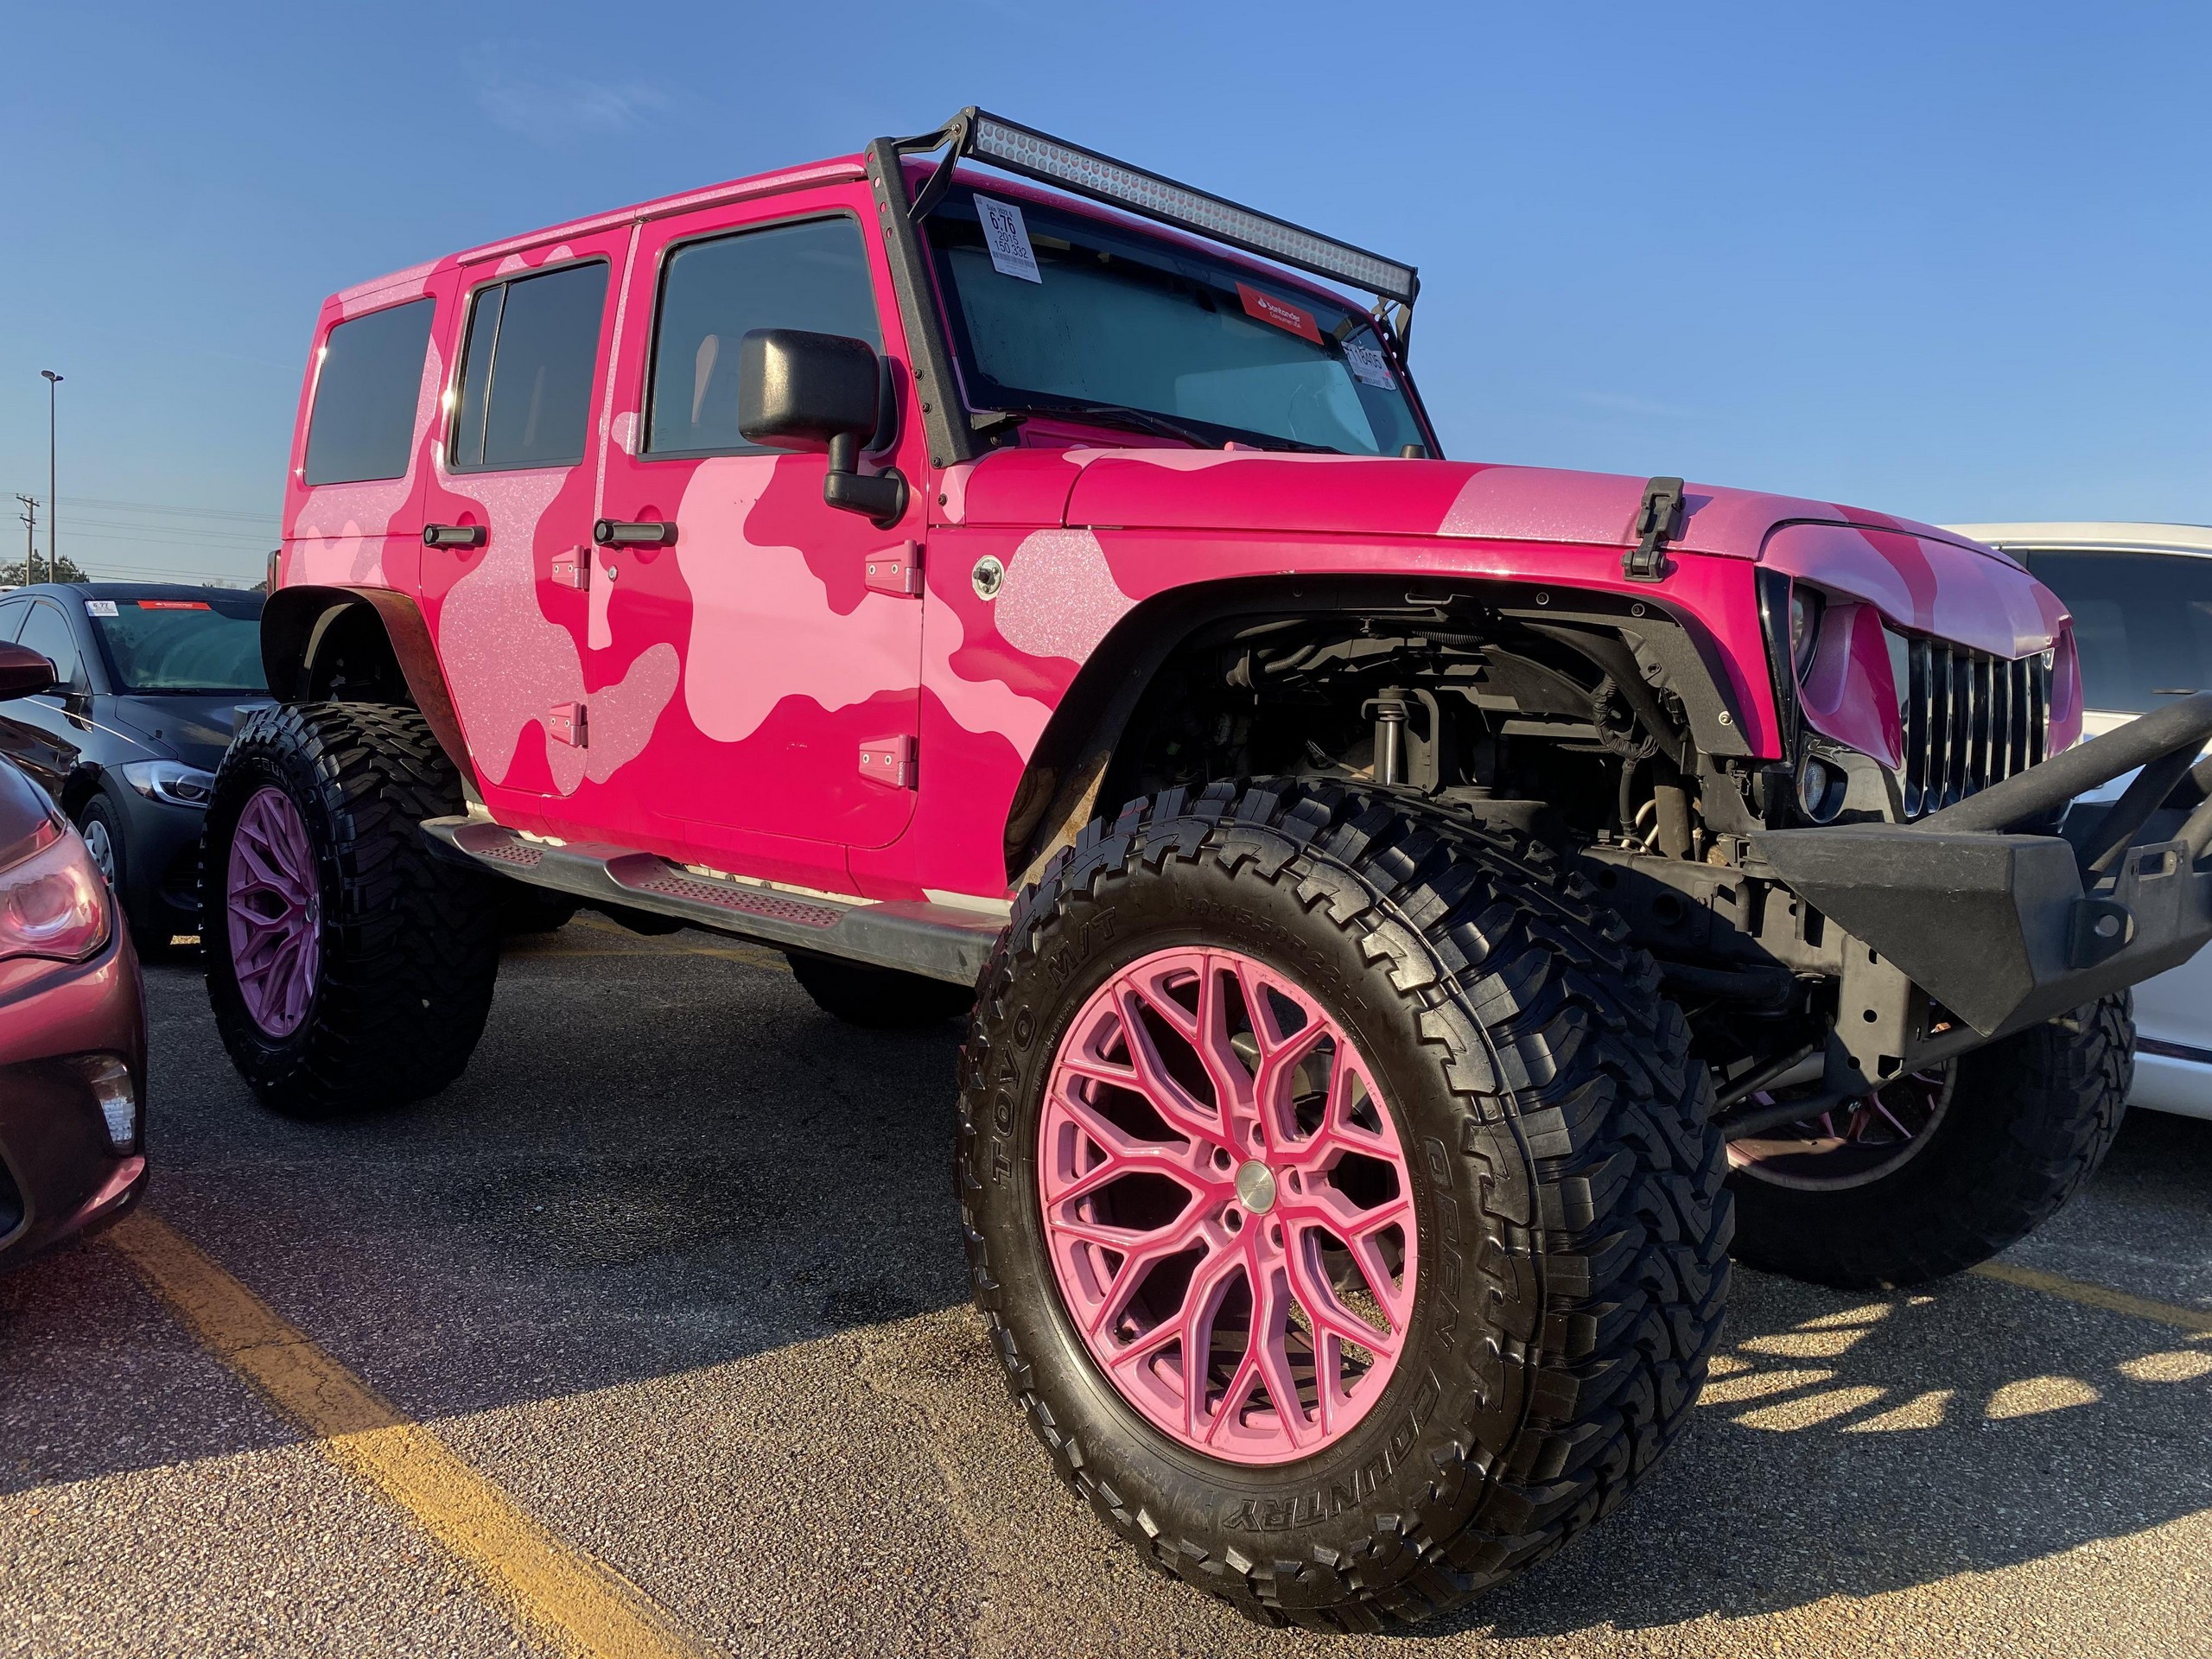 Make Up Your Mind, Bro, Do You Want Your Pink-Camo'd Jeep Wrangler to Be  Seen or Not? - autoevolution